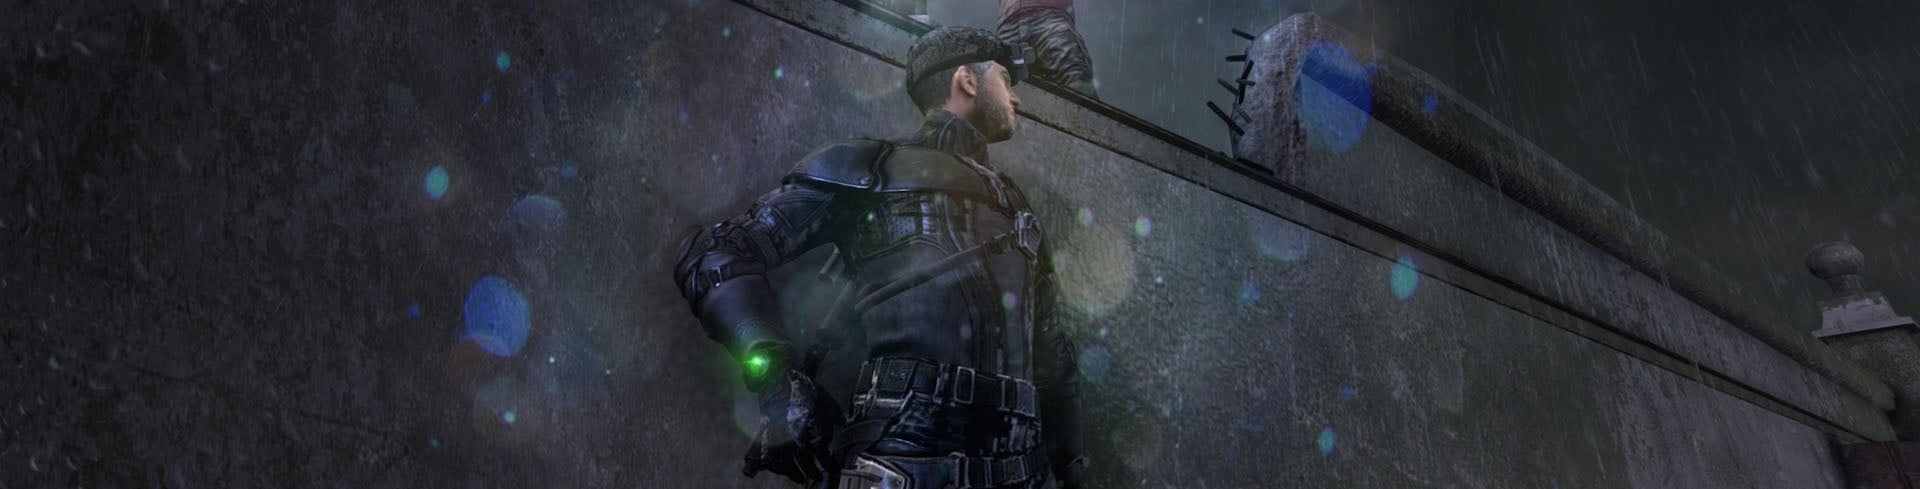 Image for Raymond: Splinter Cell popularity held back by its complexity